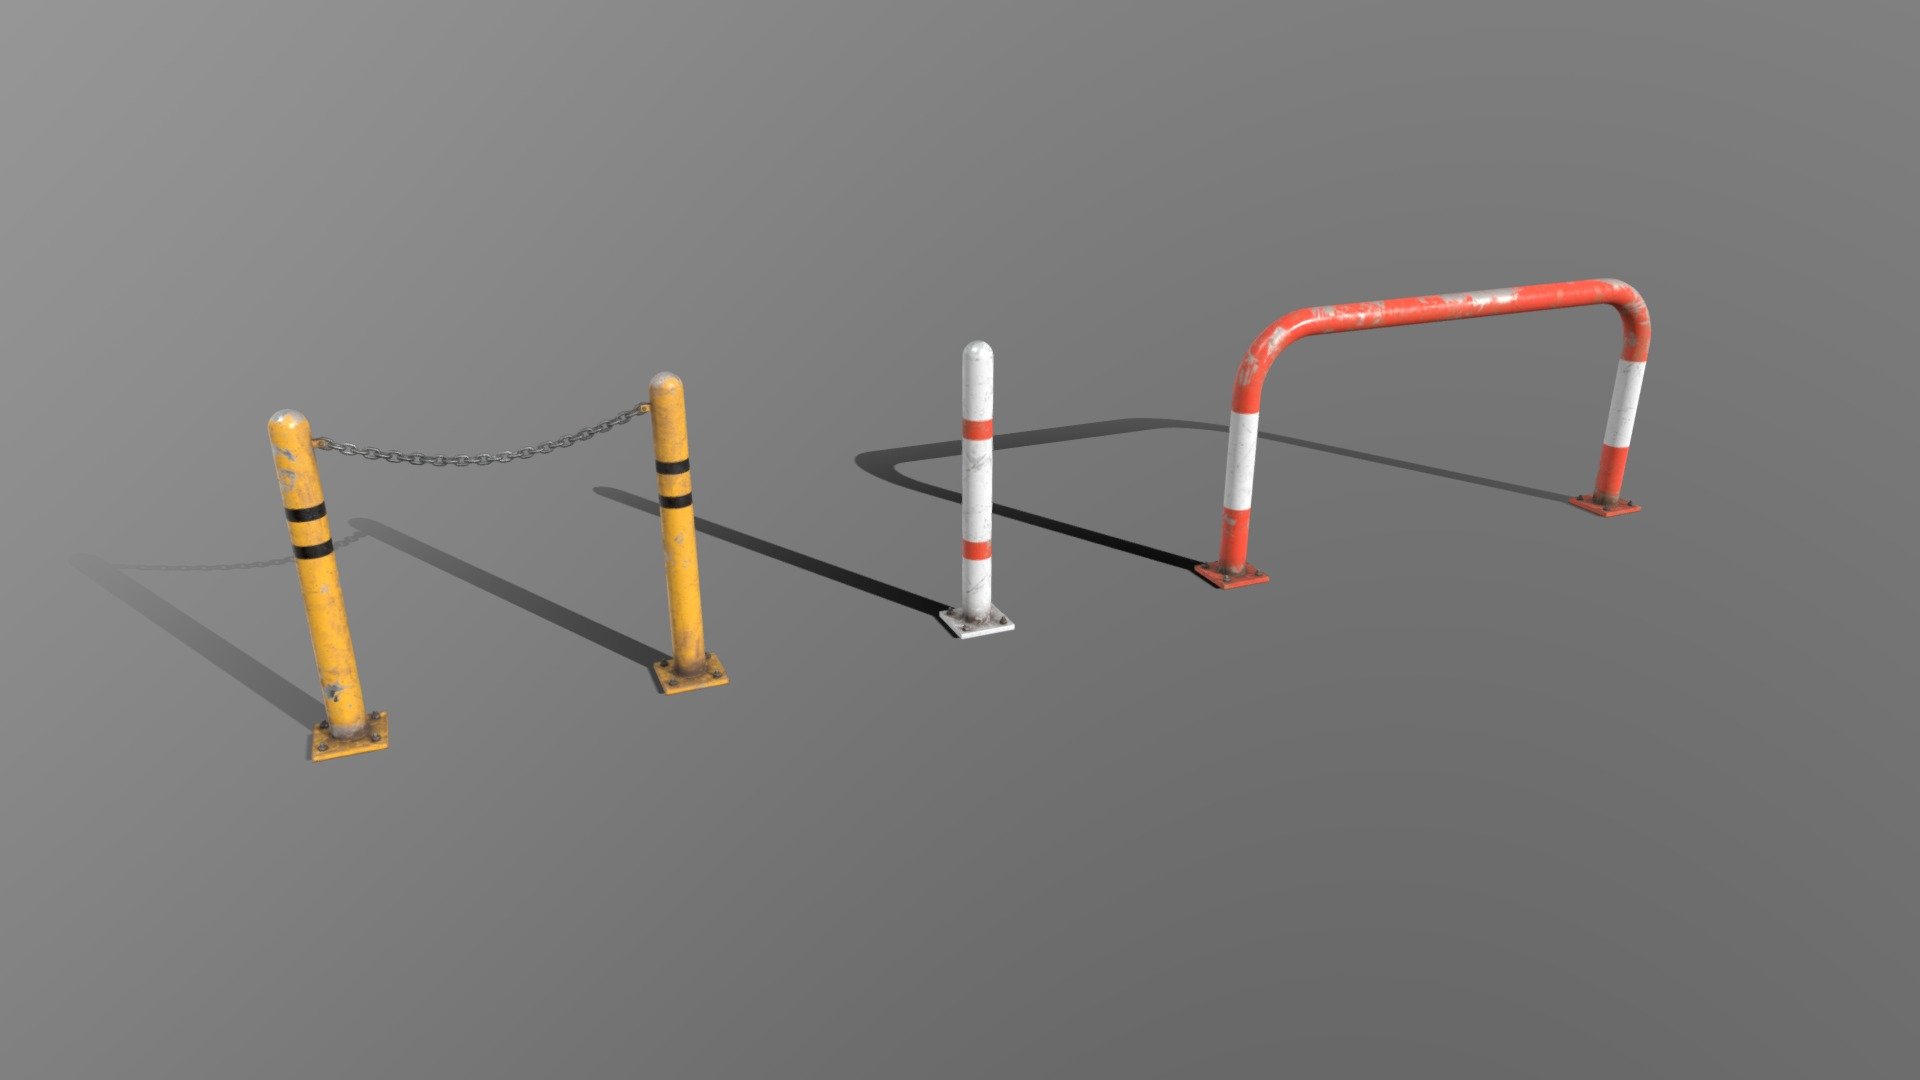 Traffic barrier poles for inner city and industrial areas.

Modeled in Blender, Textured wih Substance Painter 3d model